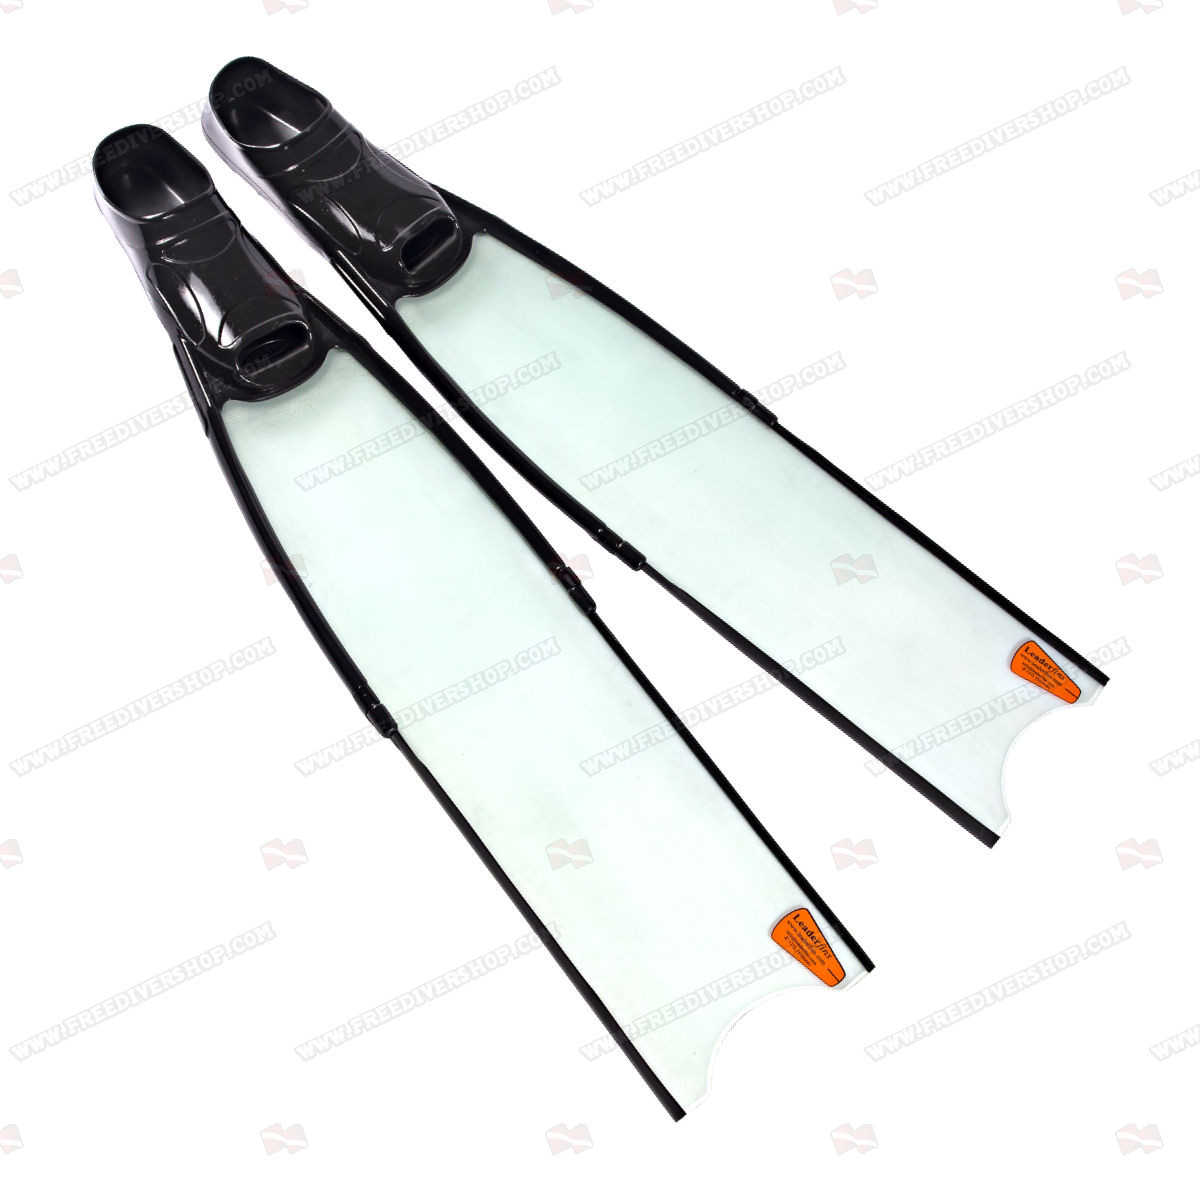 ALL SIZES Leaderfins Carbon Freediving Spearfishing Fins 